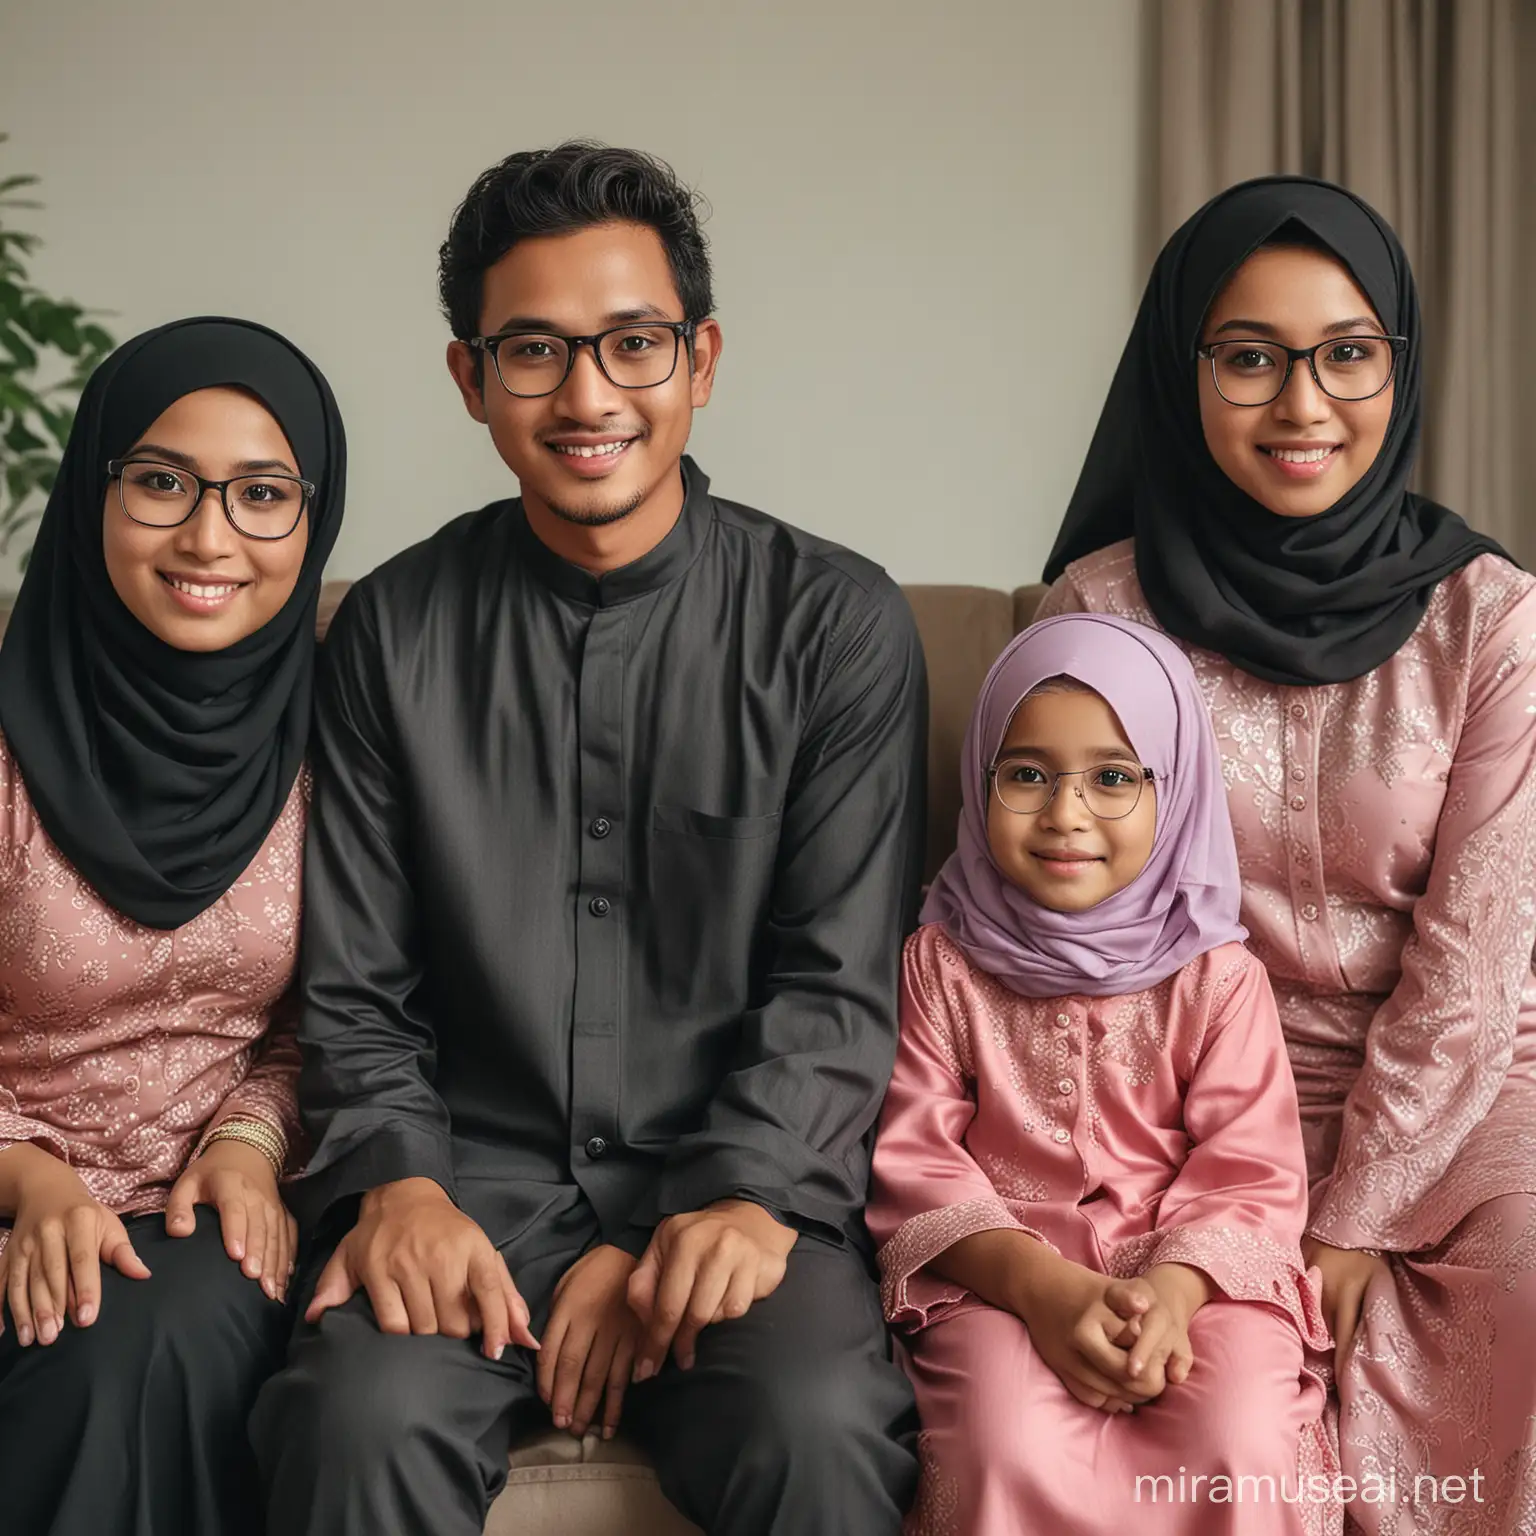 There are 4 Indonesian families. Male (30 years old): Clean face, long curly hair, and reading glasses. black pants 30 year old woman (fat): Wearing a hijab, wearing glasses, kebaya Girls (7 years): wear hijab. kebaya clothes Grandmother (70 years): Also wearing a hijab, kebaya, with a dark impression. Background: sitting on the sofa in the living room, whole body, all smiling sweetly looking at the camera in ultra HD.